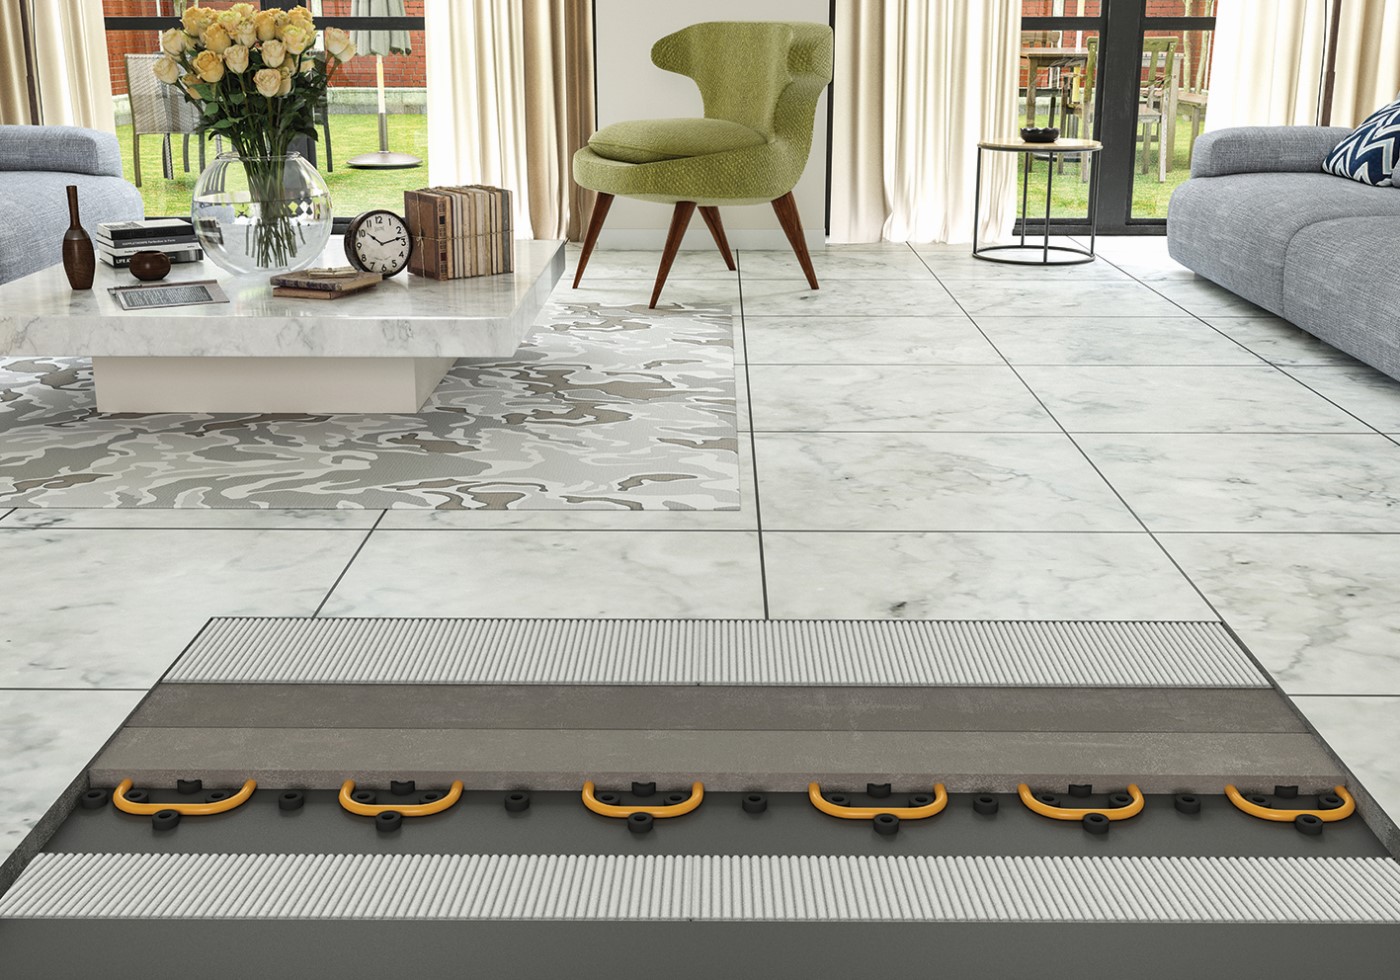 Ceramic Tile Application Solutions in Underfloor Heating Systems